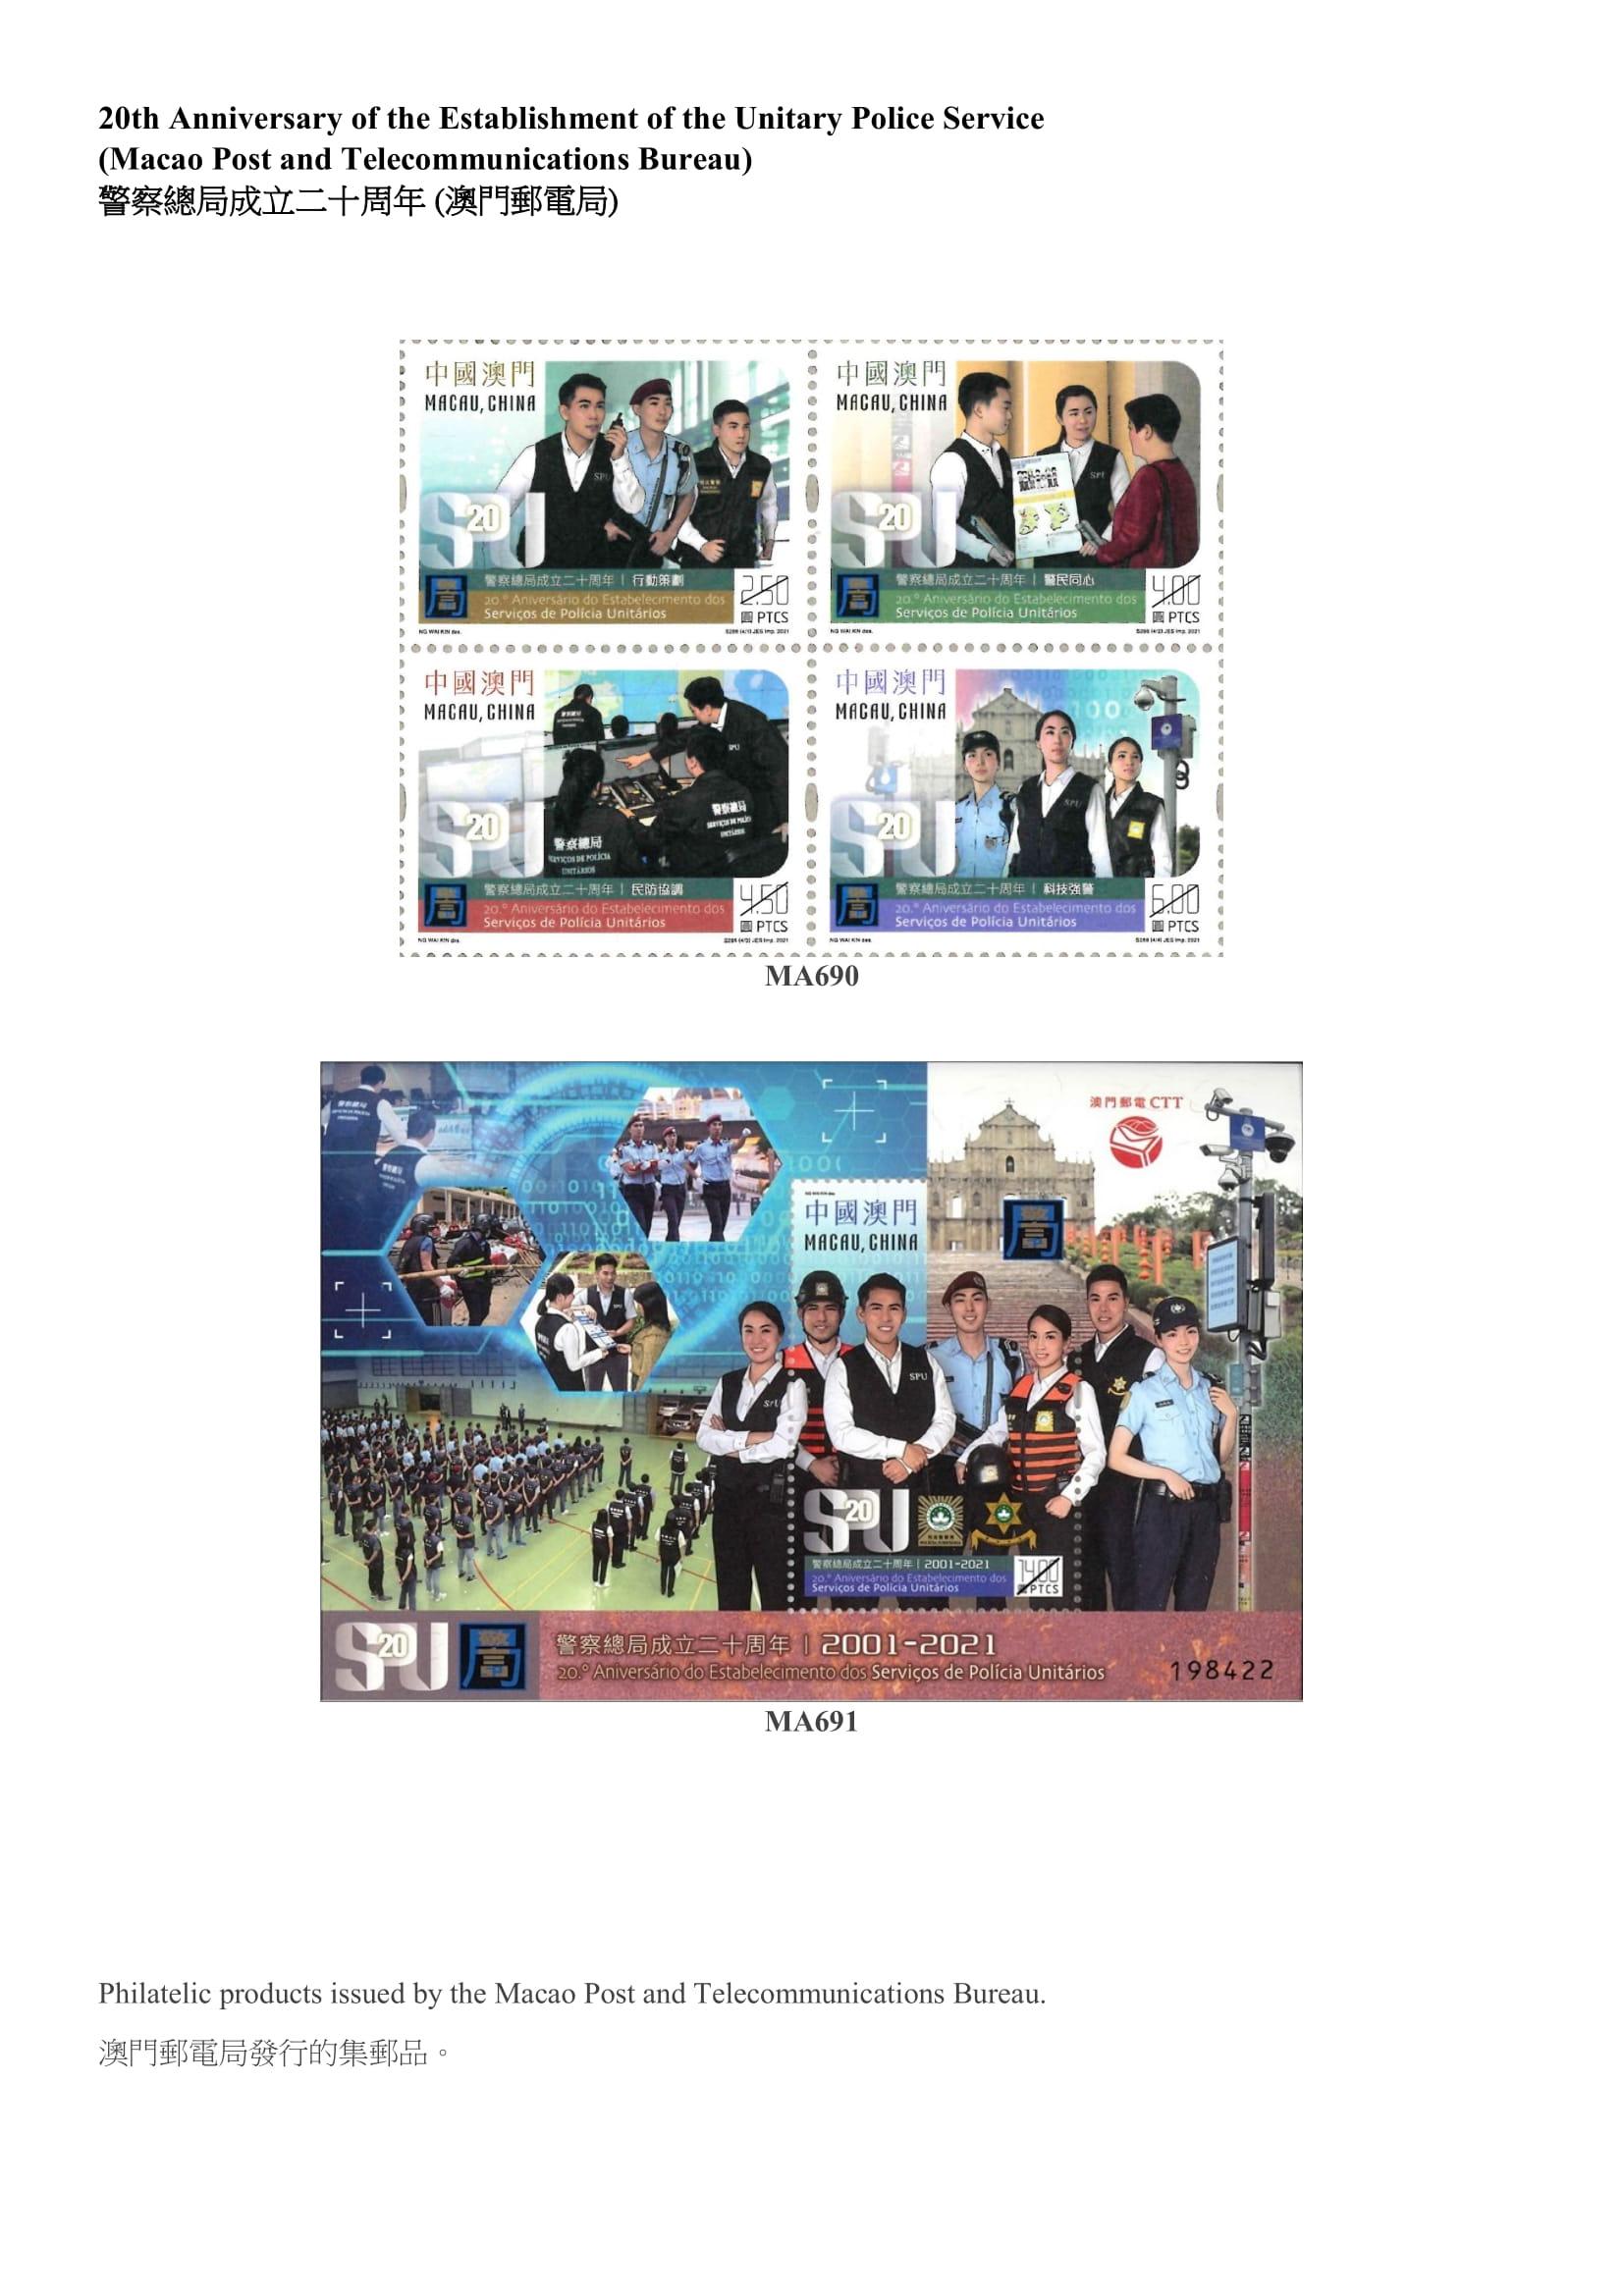 Hongkong Post announced today (December 14) that selected philatelic products issued by Macao and overseas postal administrations, including Australia, Canada, Japan, Liechtenstein and New Zealand, will be put on sale at the Hongkong Post online shopping mall ShopThruPost starting from 8am on December 16. Picture shows philatelic products issued by the Macao Post and Telecommunications Bureau.
